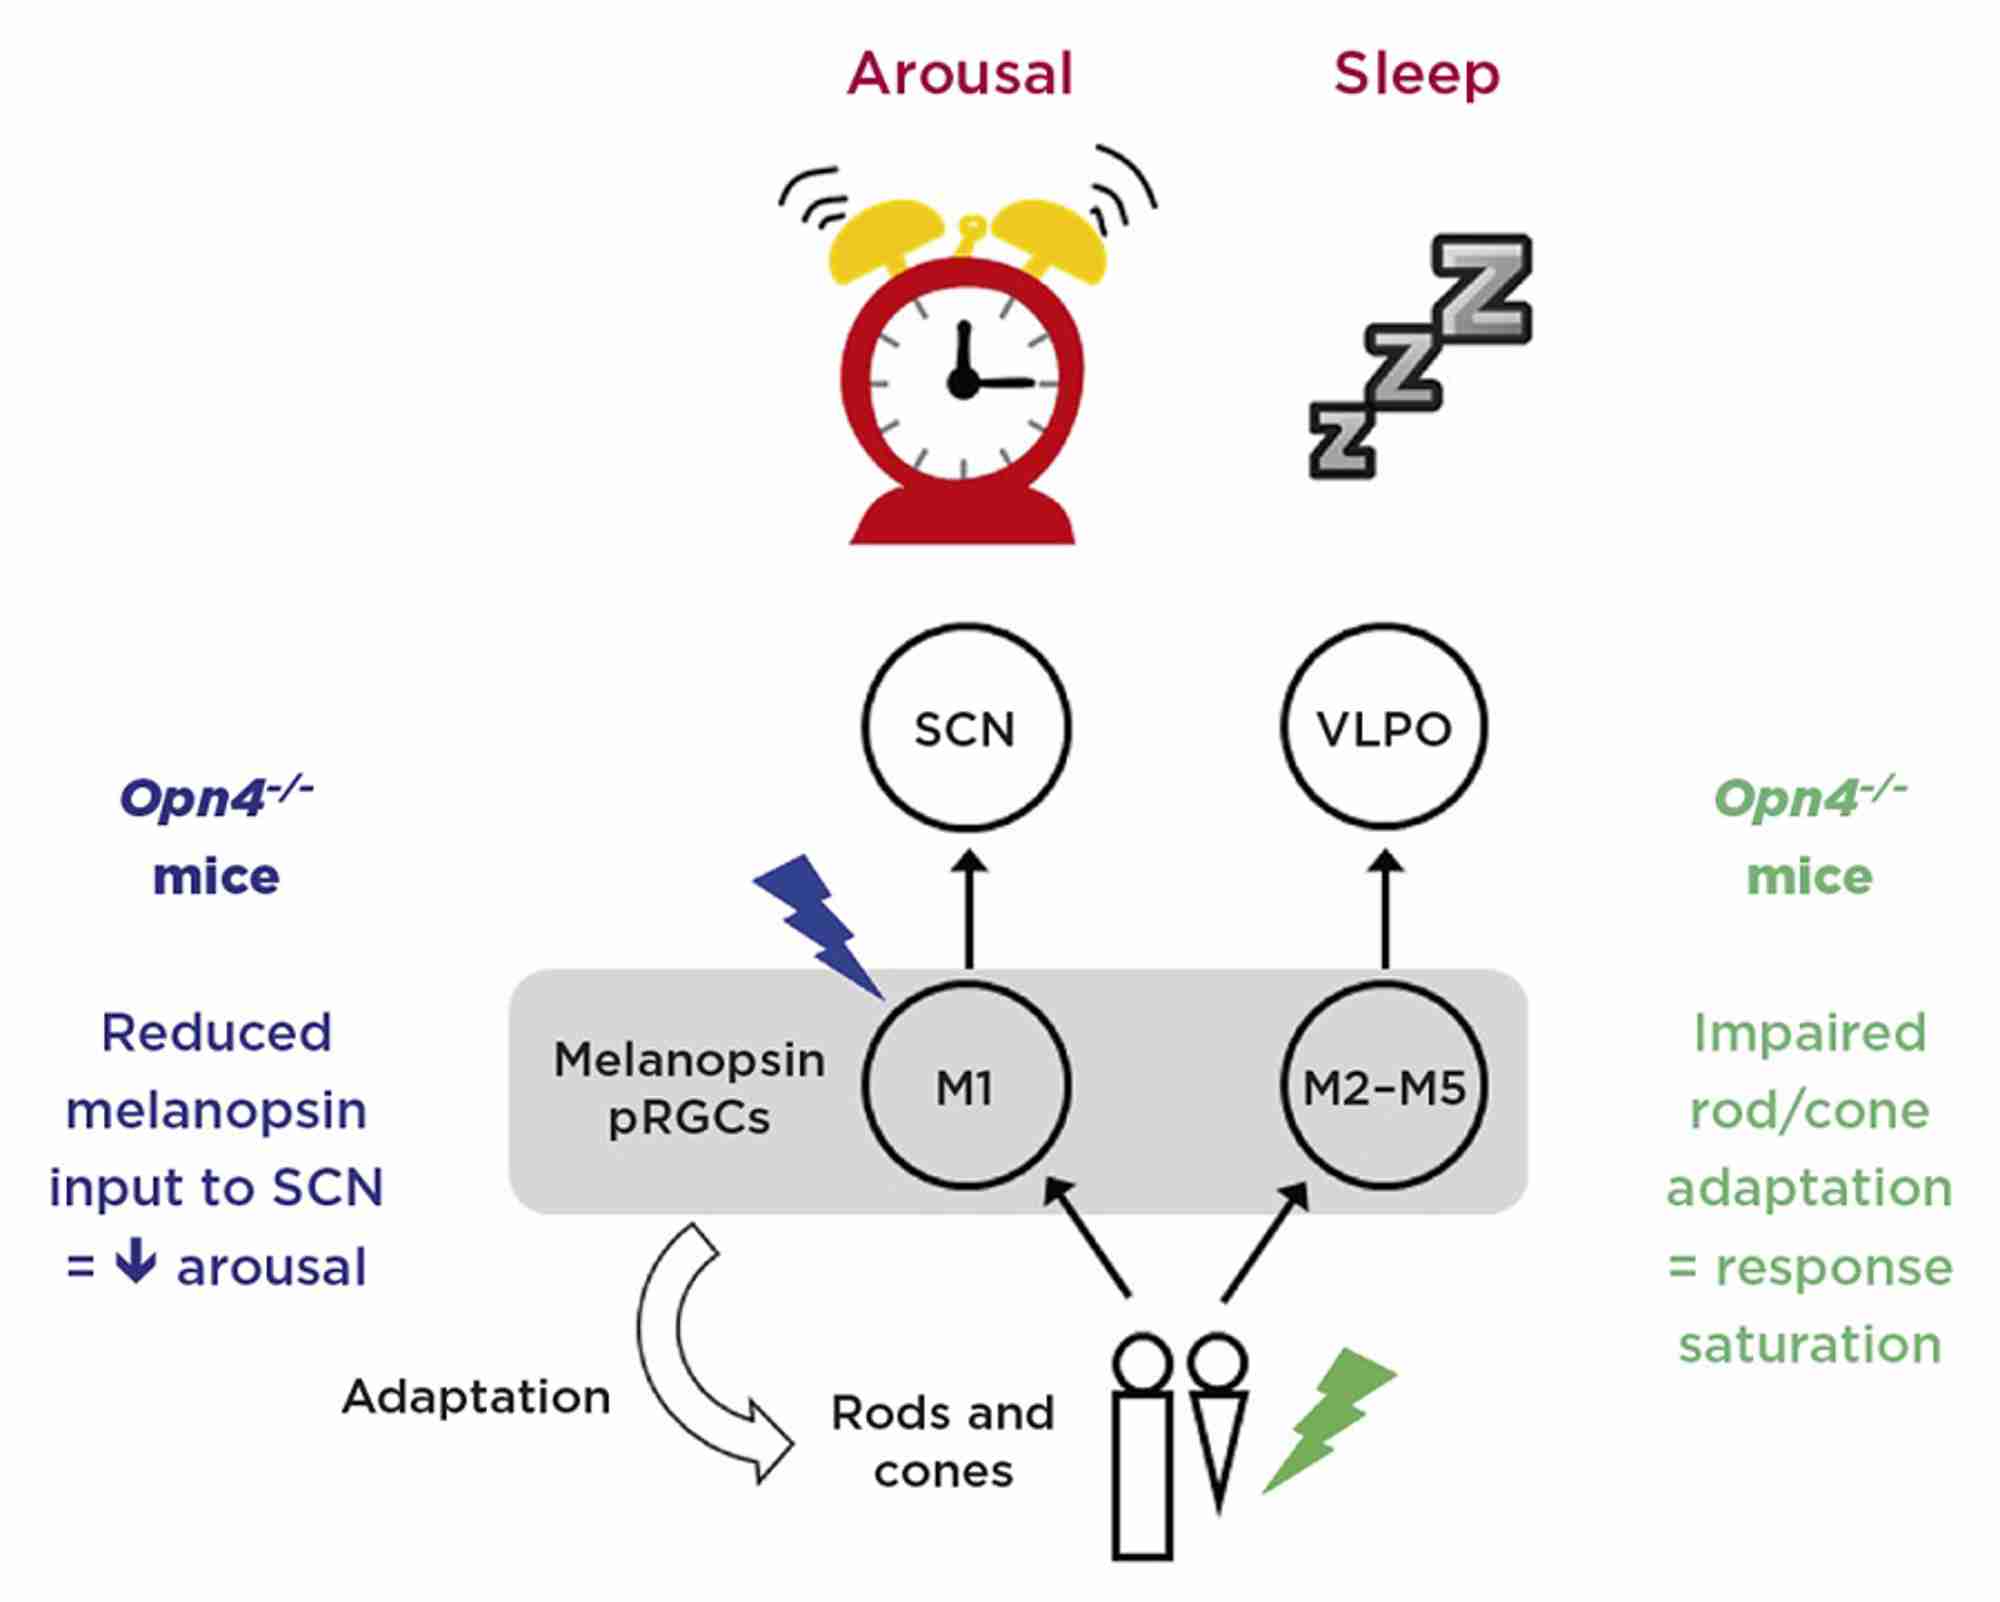 Figure 2. Model illustrating the opposing eff ects of light on sleep and arousal. M1 photosensitive retinal ganglion cells (pRGCs) express high levels of melanopsin and respond maximally to blue light. These cells project directly to the suprachiasmatic nucleus (SCN) and promote arousal via SCN inputs to the sympathetic nervous system. By contrast, M2–M5 cells are more dependent upon rod and cone input, and are thus more sensitive to green light. These cells project to the sleep switch in the ventrolateral preoptic area (VLPO). Mice lacking melanopsin (Opn4–/–) show impaired arousal responses to blue light. Furthermore, as melanopsin contributes to light adaptation of rods and cones, mice lacking melanopsin also show impaired responses to green light due to response saturation. Credit: S.Peirson